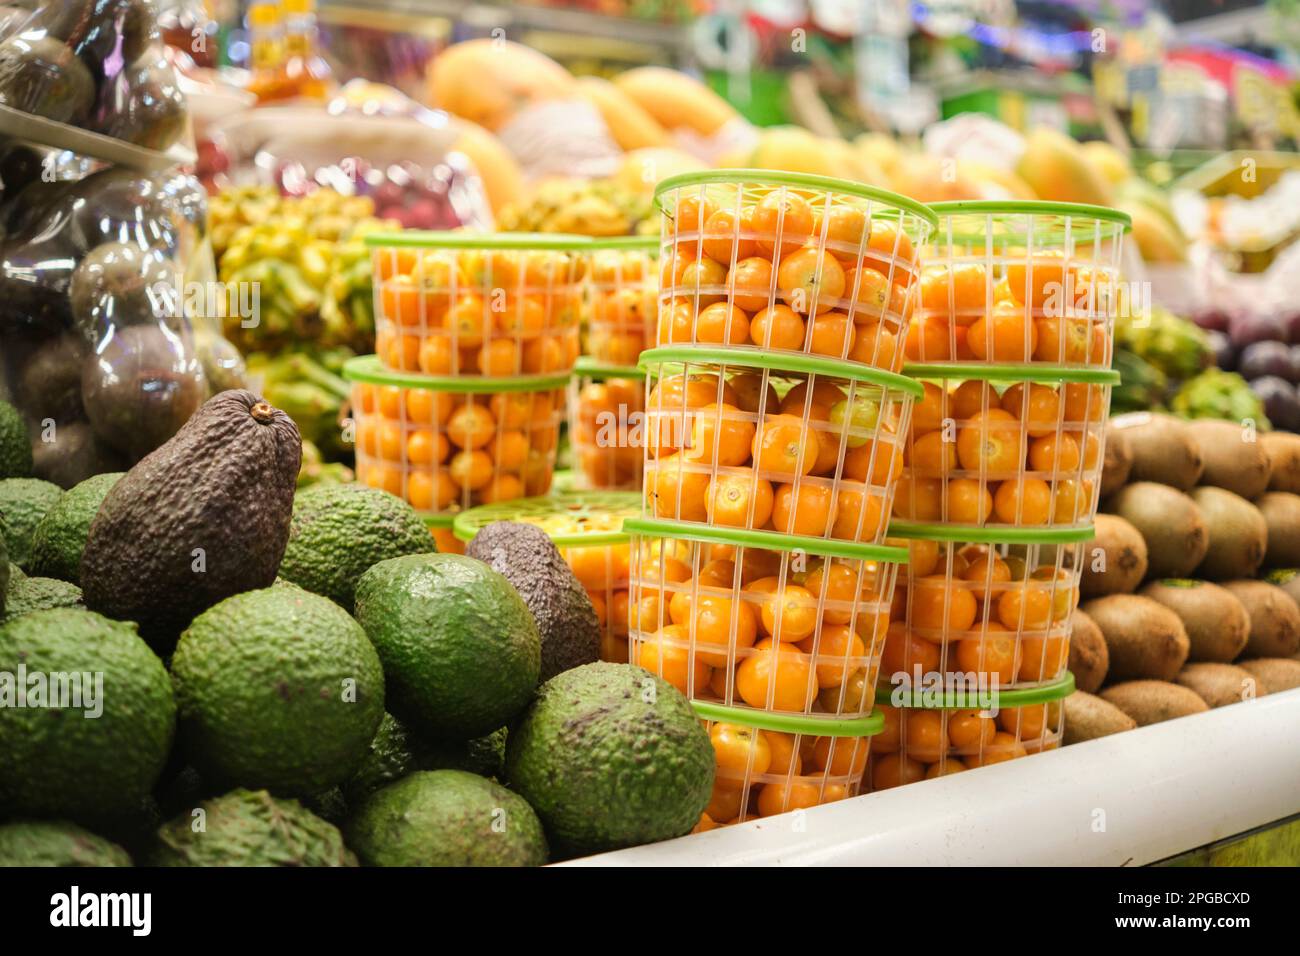 Gooseberries or goldenberries for sale at a fruit and vegetable market stall in Colombia. Stock Photo